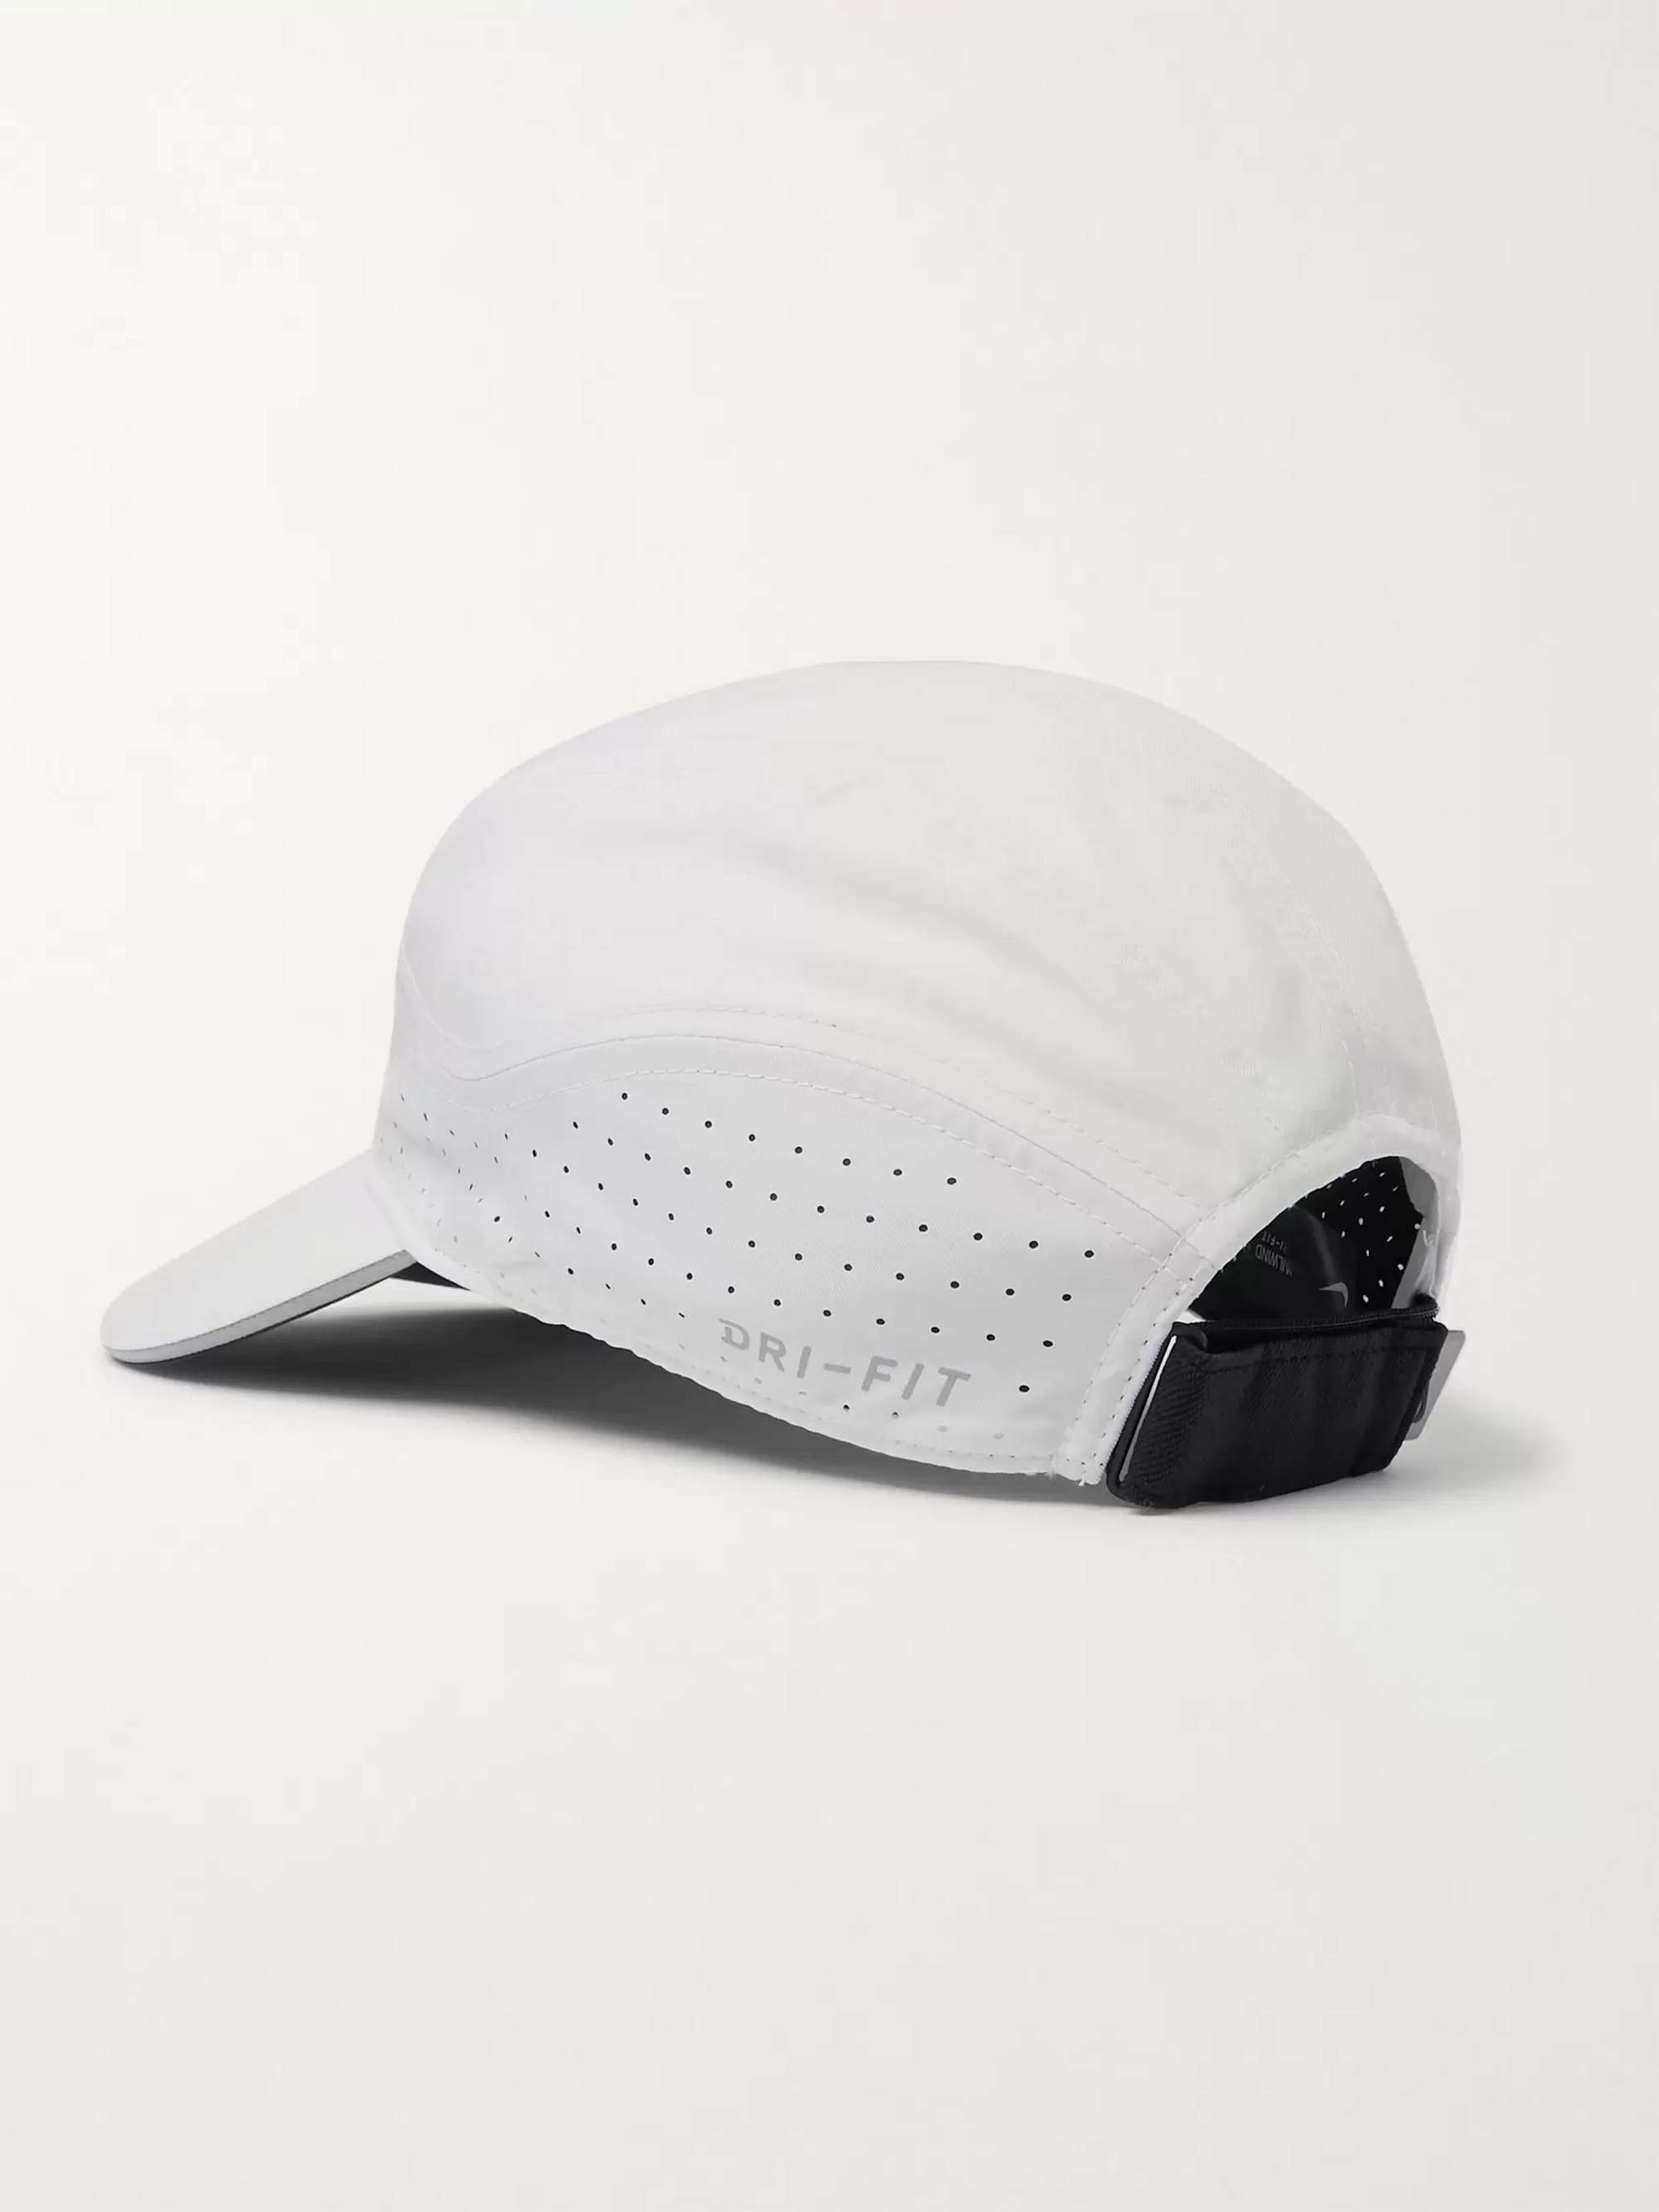 NIKE RUNNING AeroBill Tailwind Perforated Recycled Dri-FIT Baseball Cap